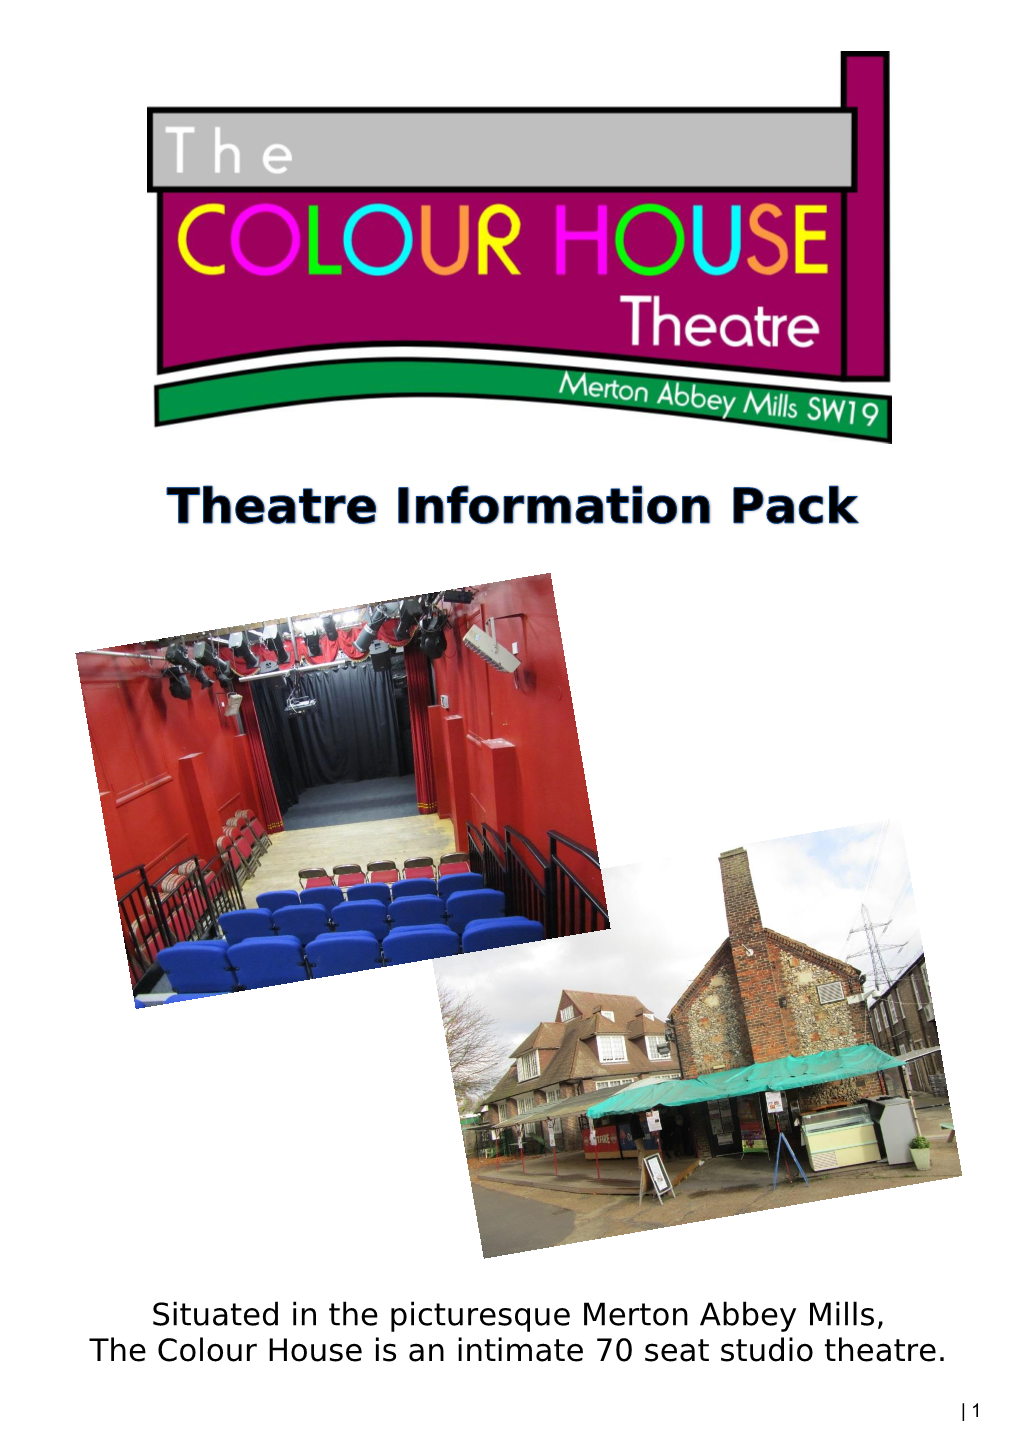 Situated in the Picturesque Merton Abbey Mills, the Colour House Is an Intimate 70 Seat Studio Theatre